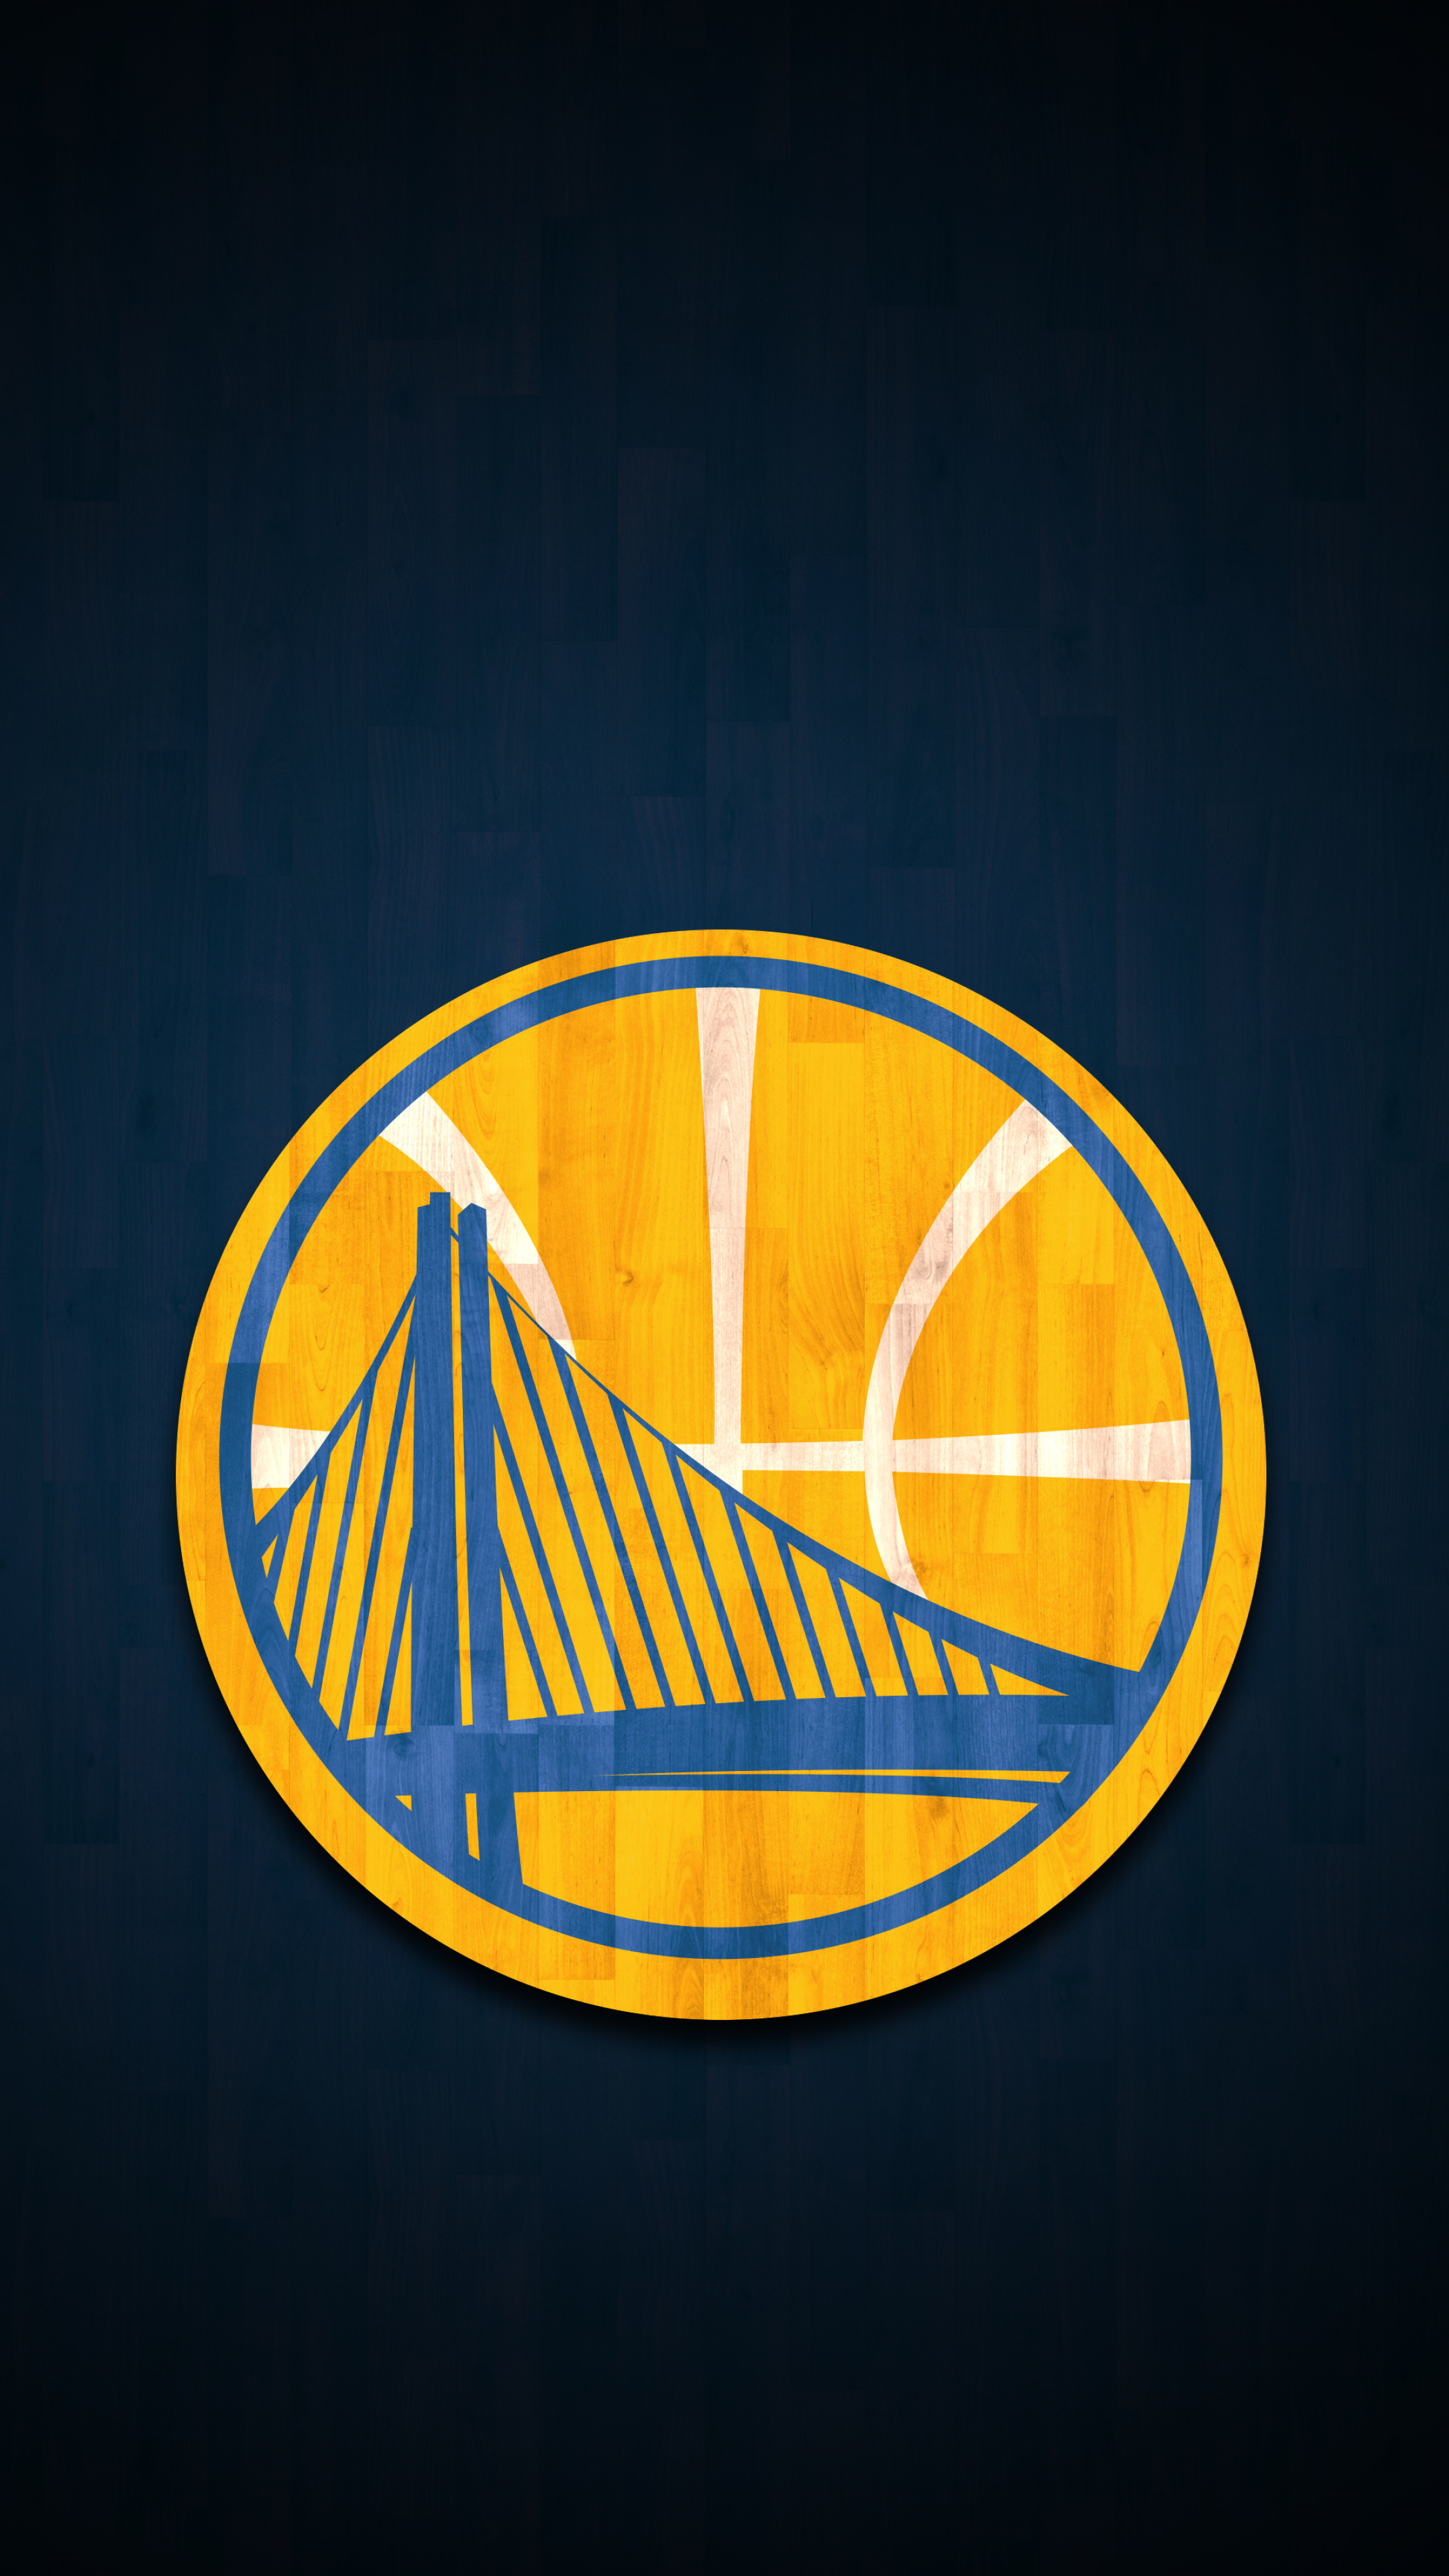 Golden State Warriors: Compete in the NBA, as a member of the Western Conference Pacific Division. 2160x3840 4K Wallpaper.